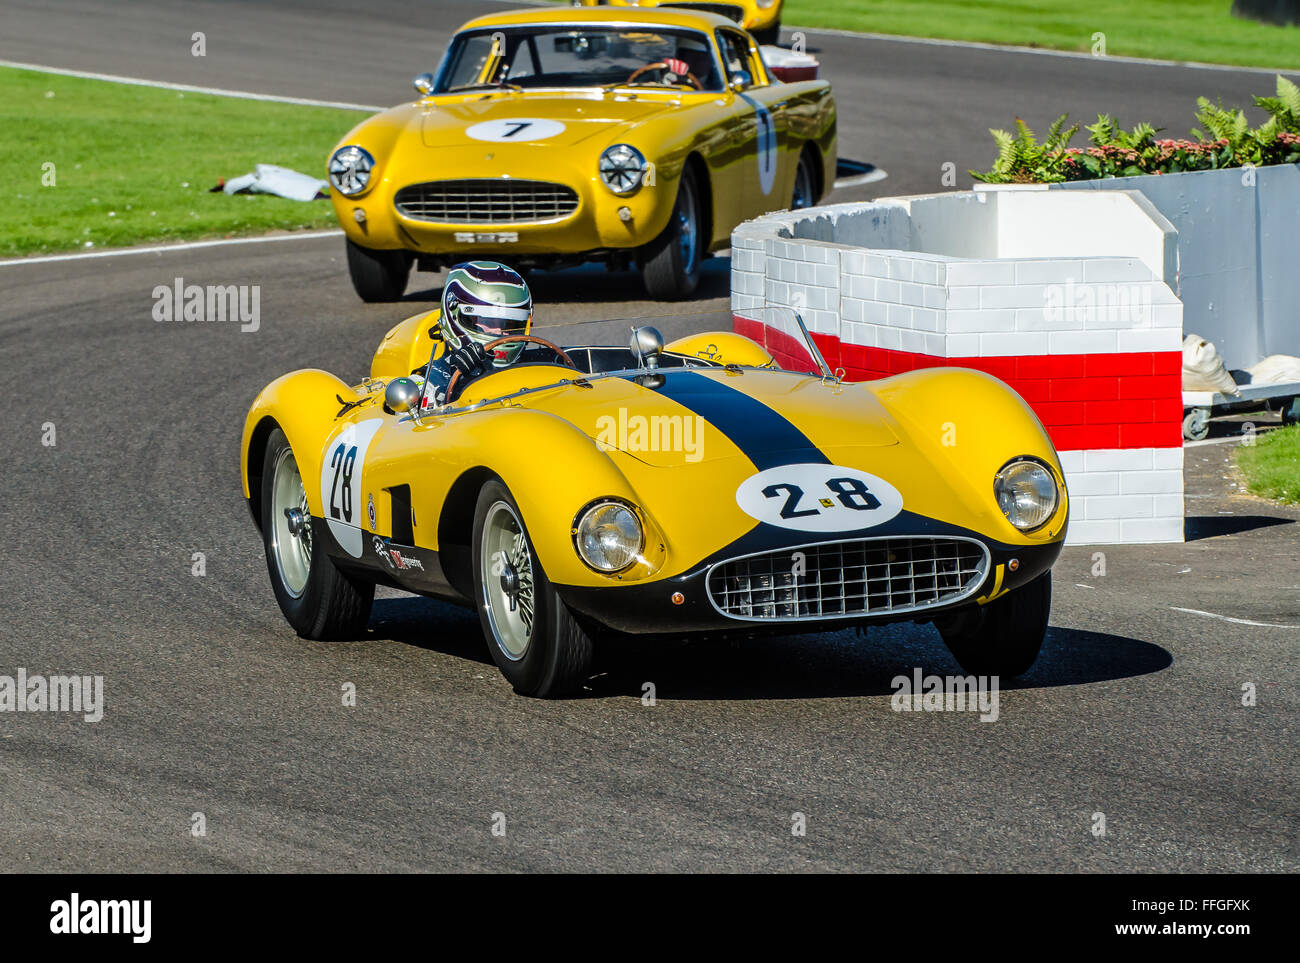 1957 Ferrari 500 TRC is owned by David Cottingham and was raced by James Cottingham at the 2015 Goodwood Revival Stock Photo